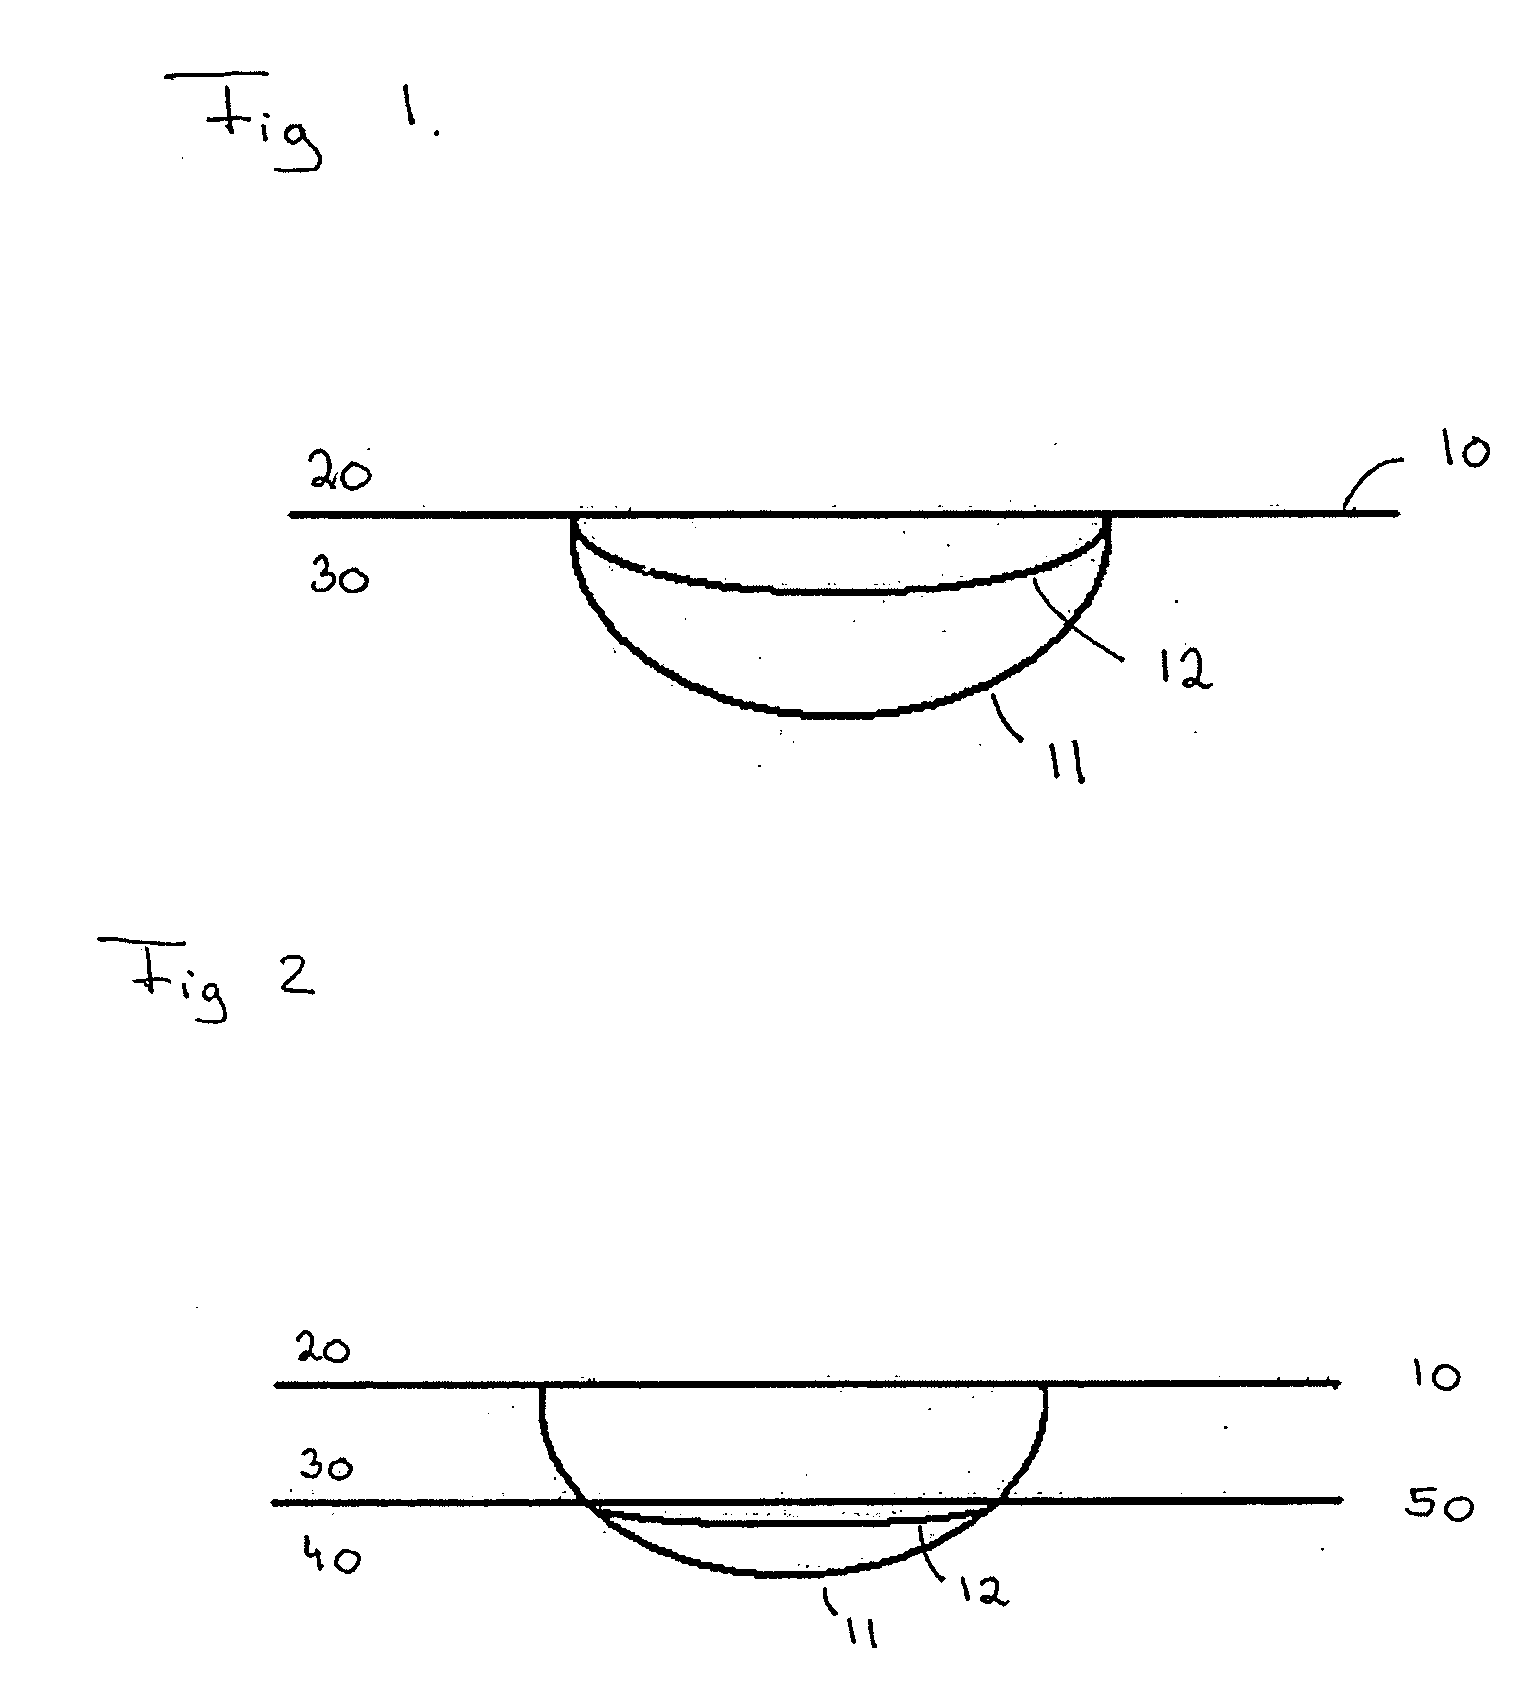 Product and a method of providing a product, such as a laser welded product